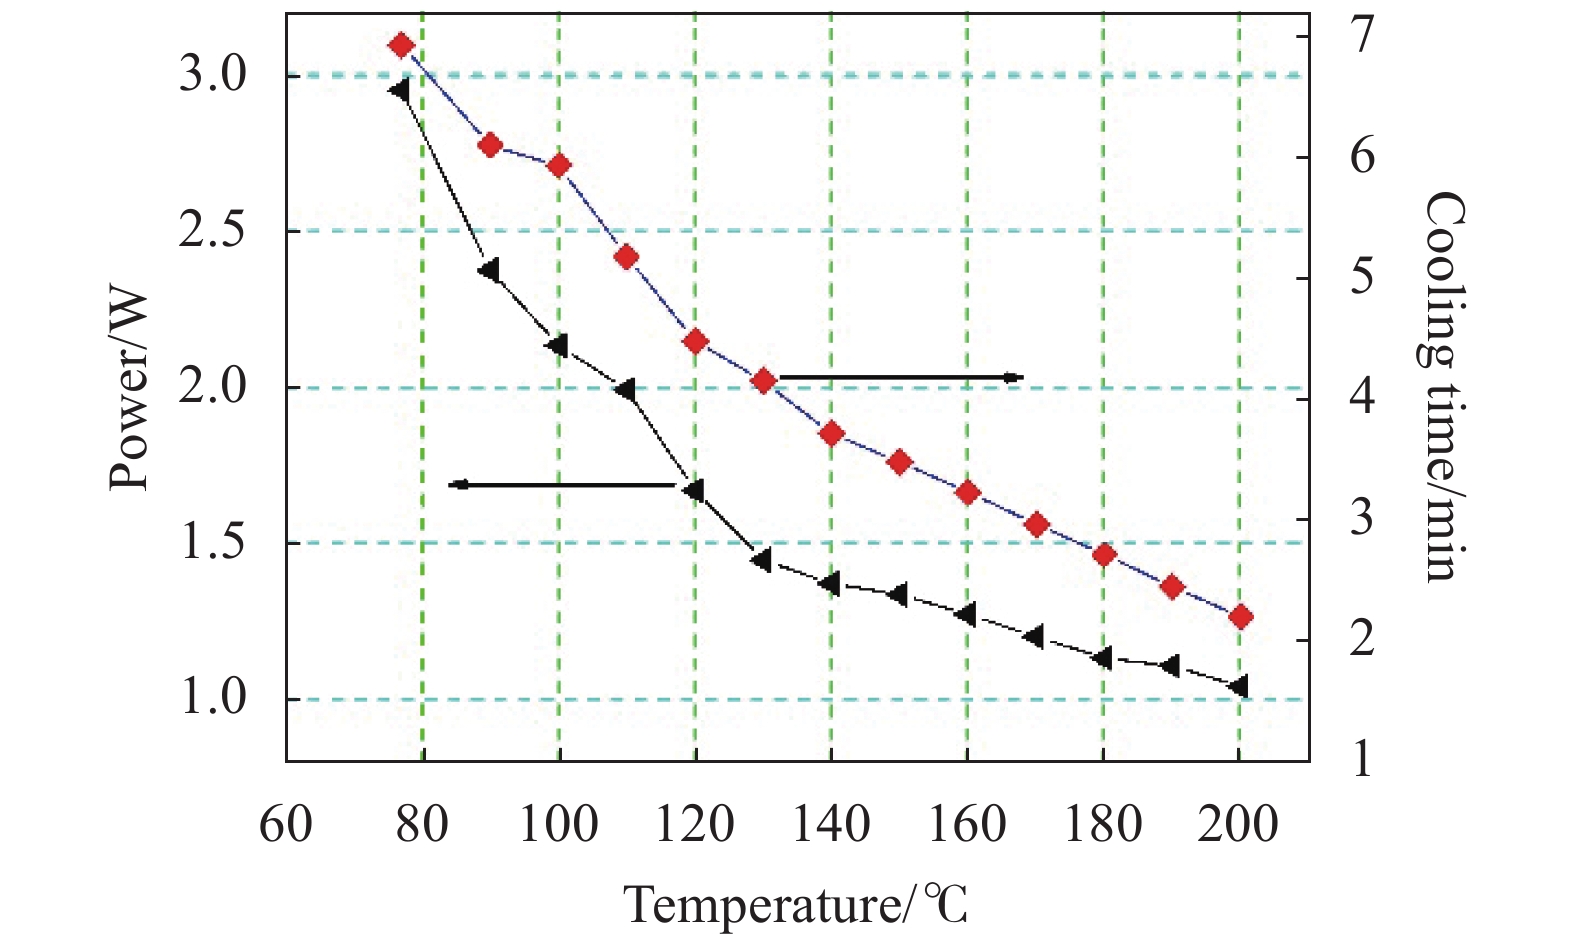 Steady state power consumption and cooling time of cryocooler at different working temperature